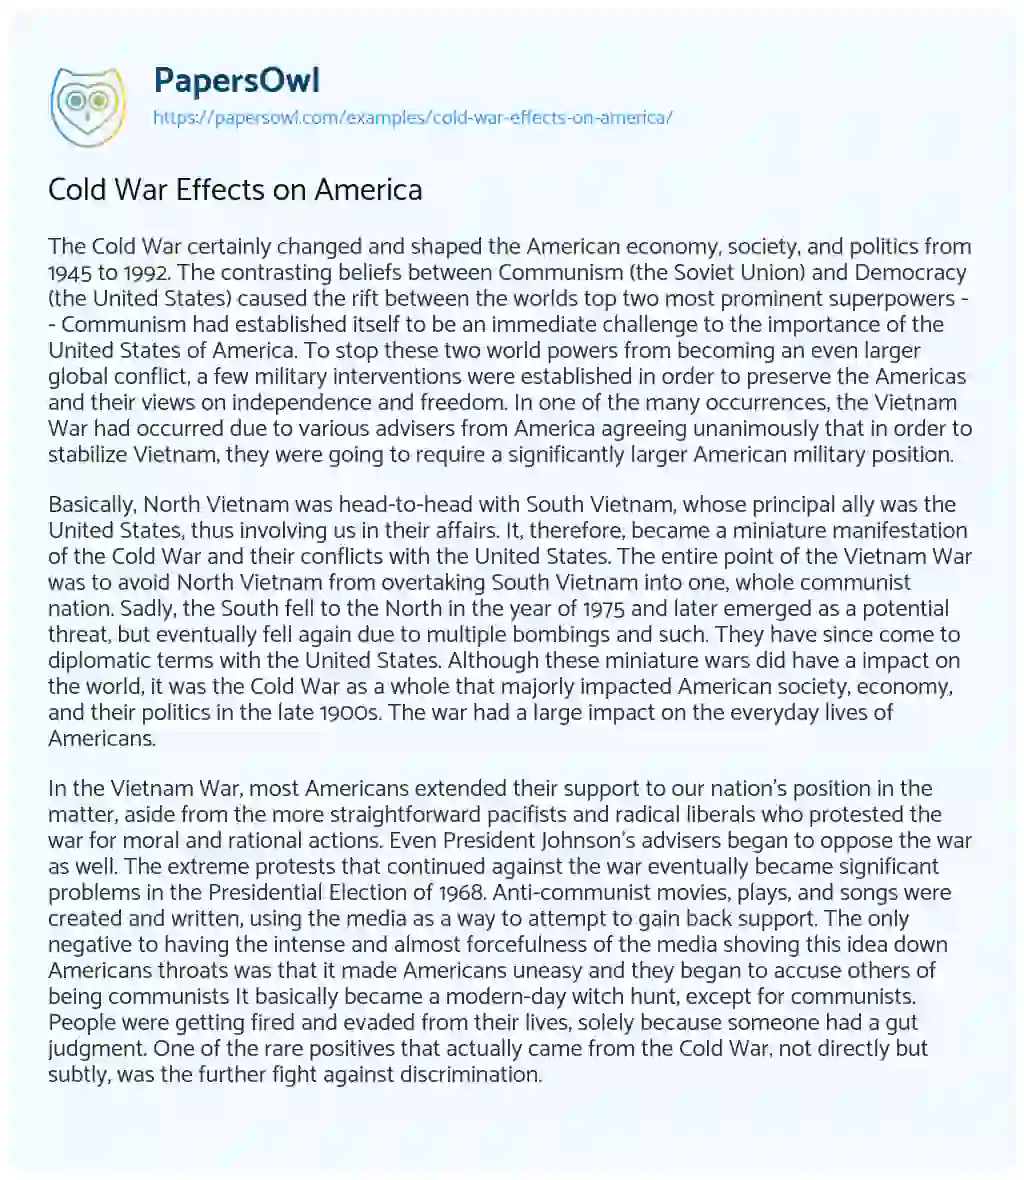 Essay on Cold War Effects on America